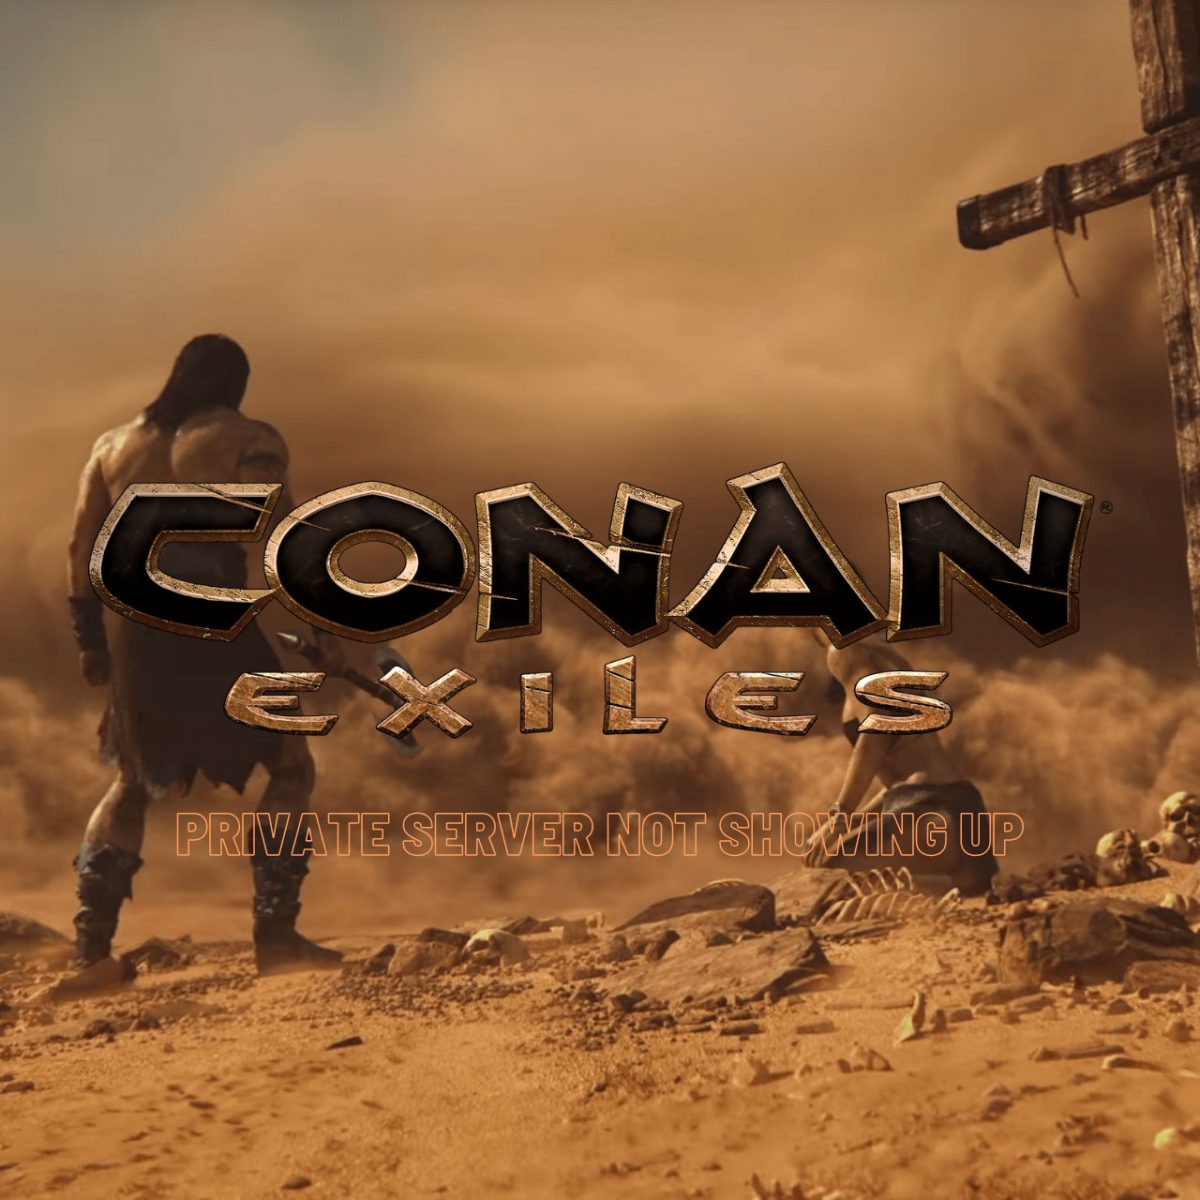 Conan Exiles not up [Full Guide]